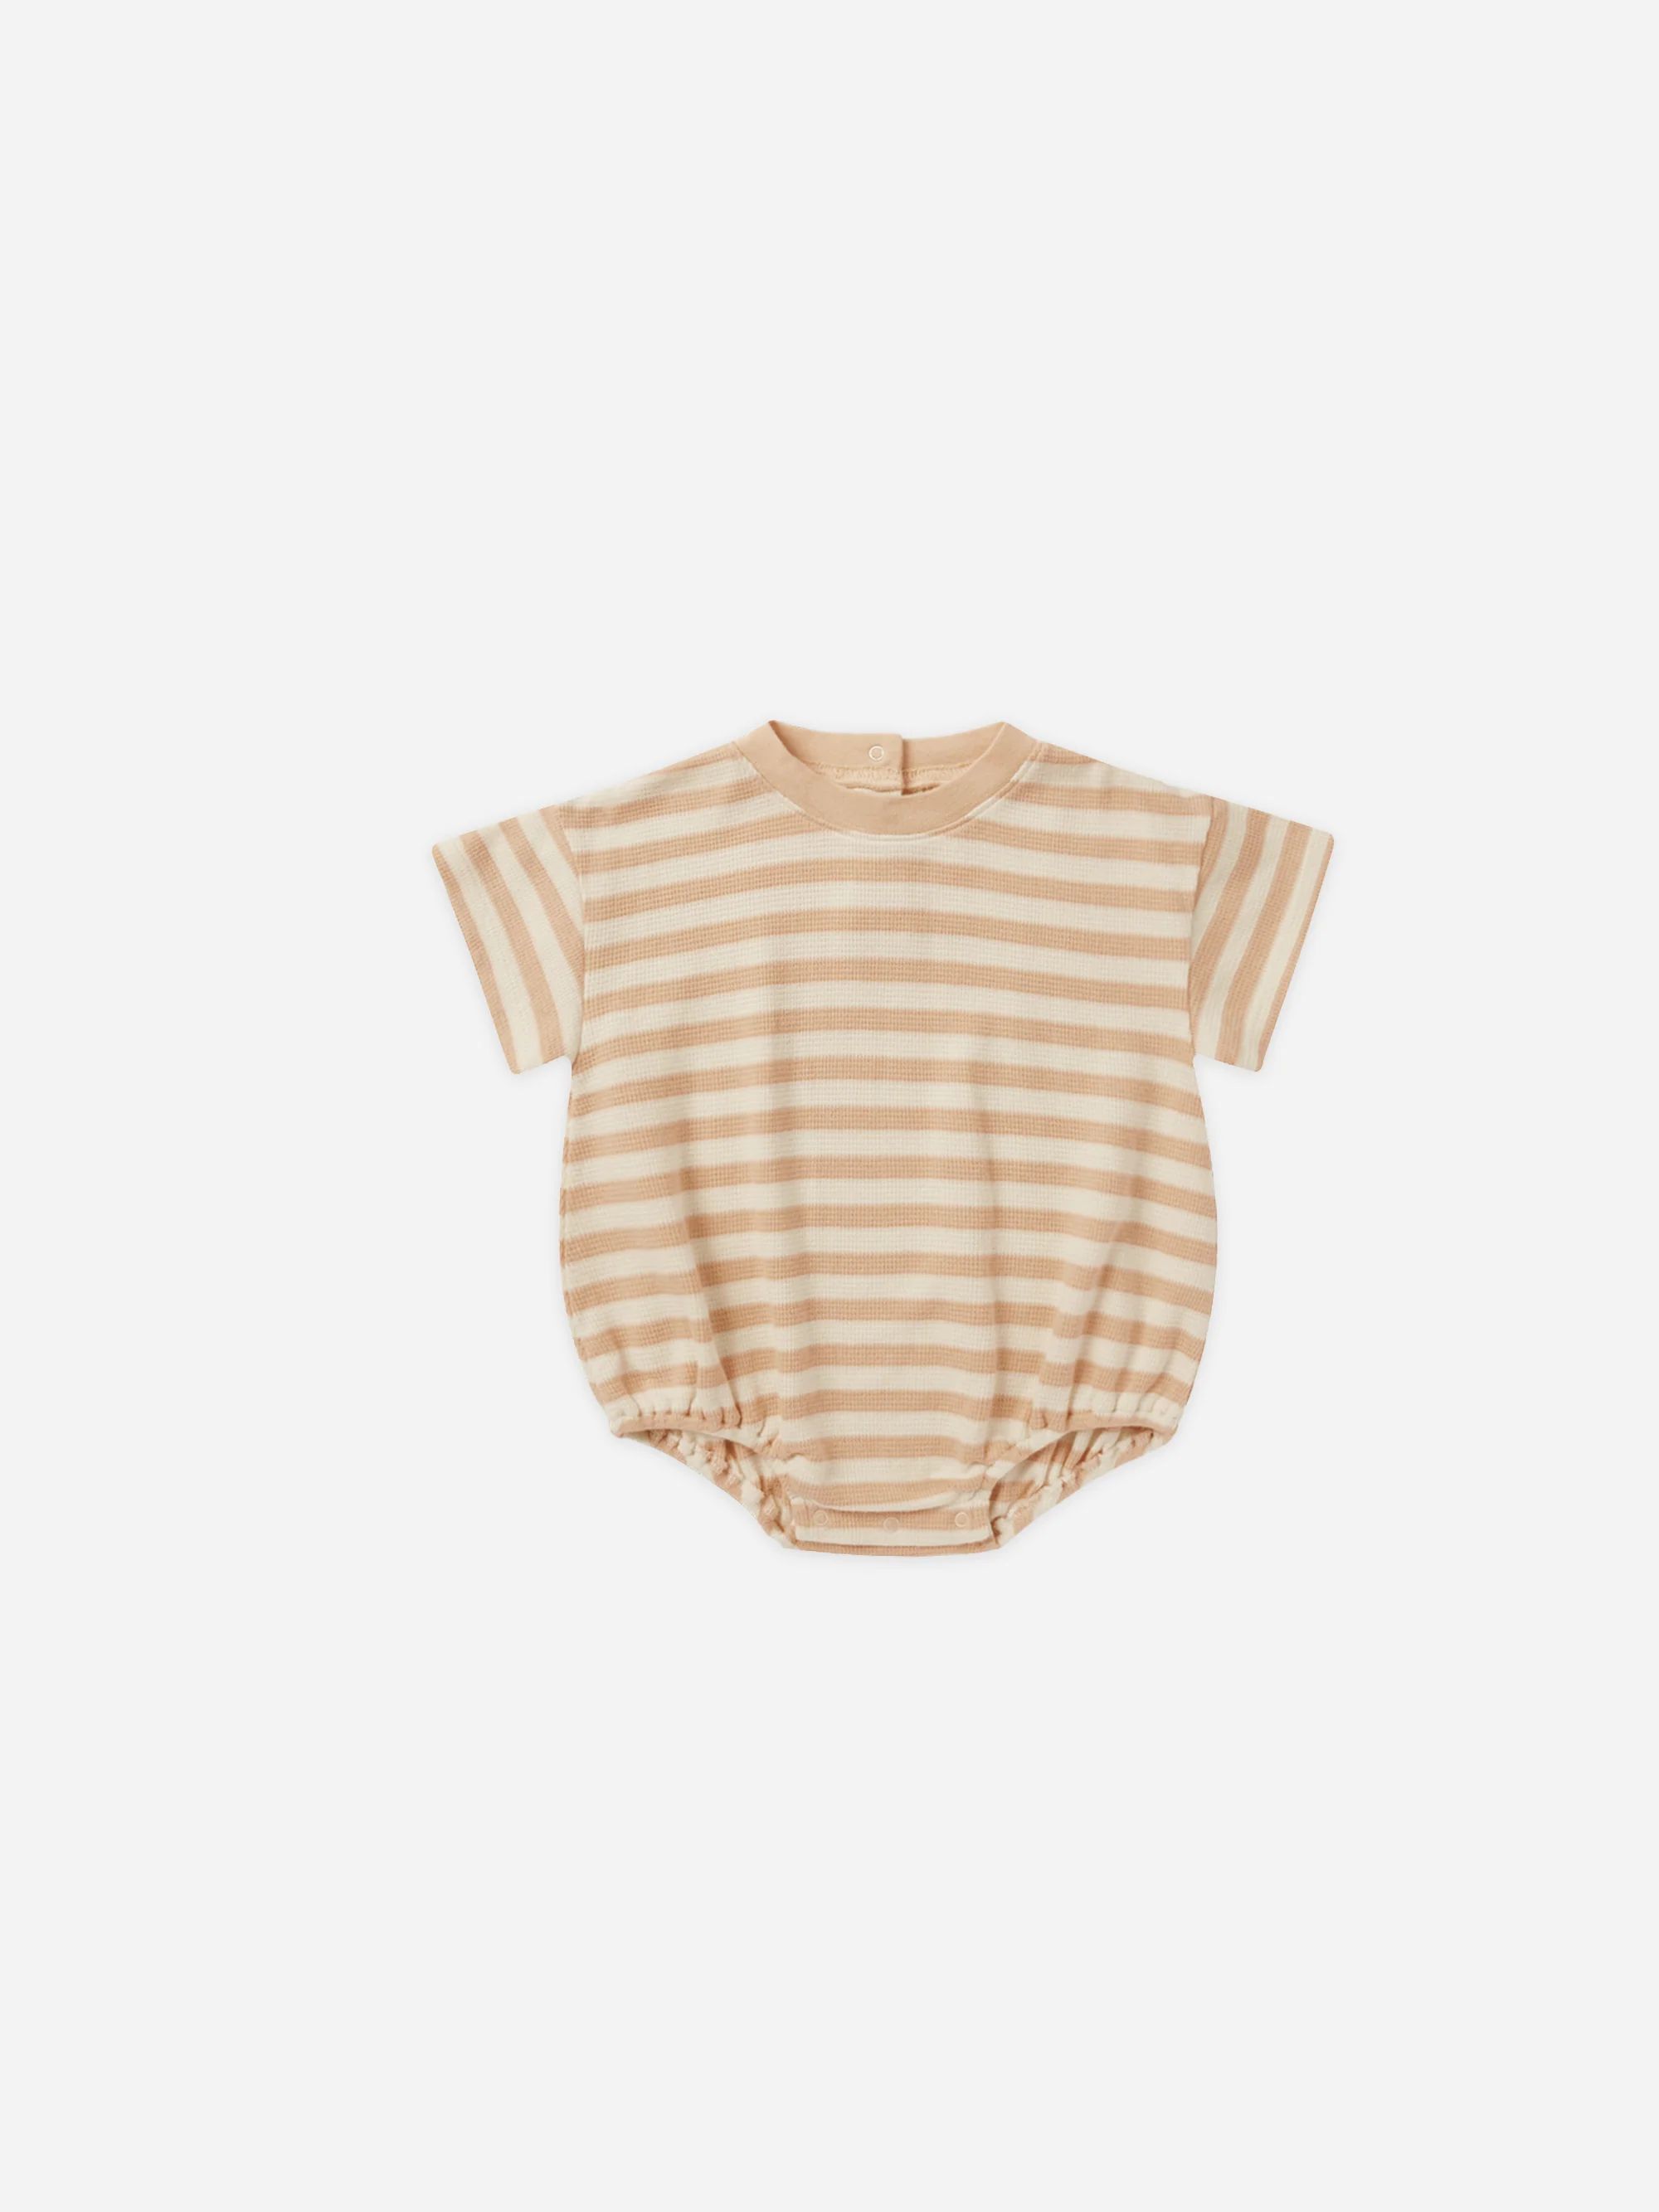 Relaxed Bubble Romper || Apricot Stripe | Rylee + Cru